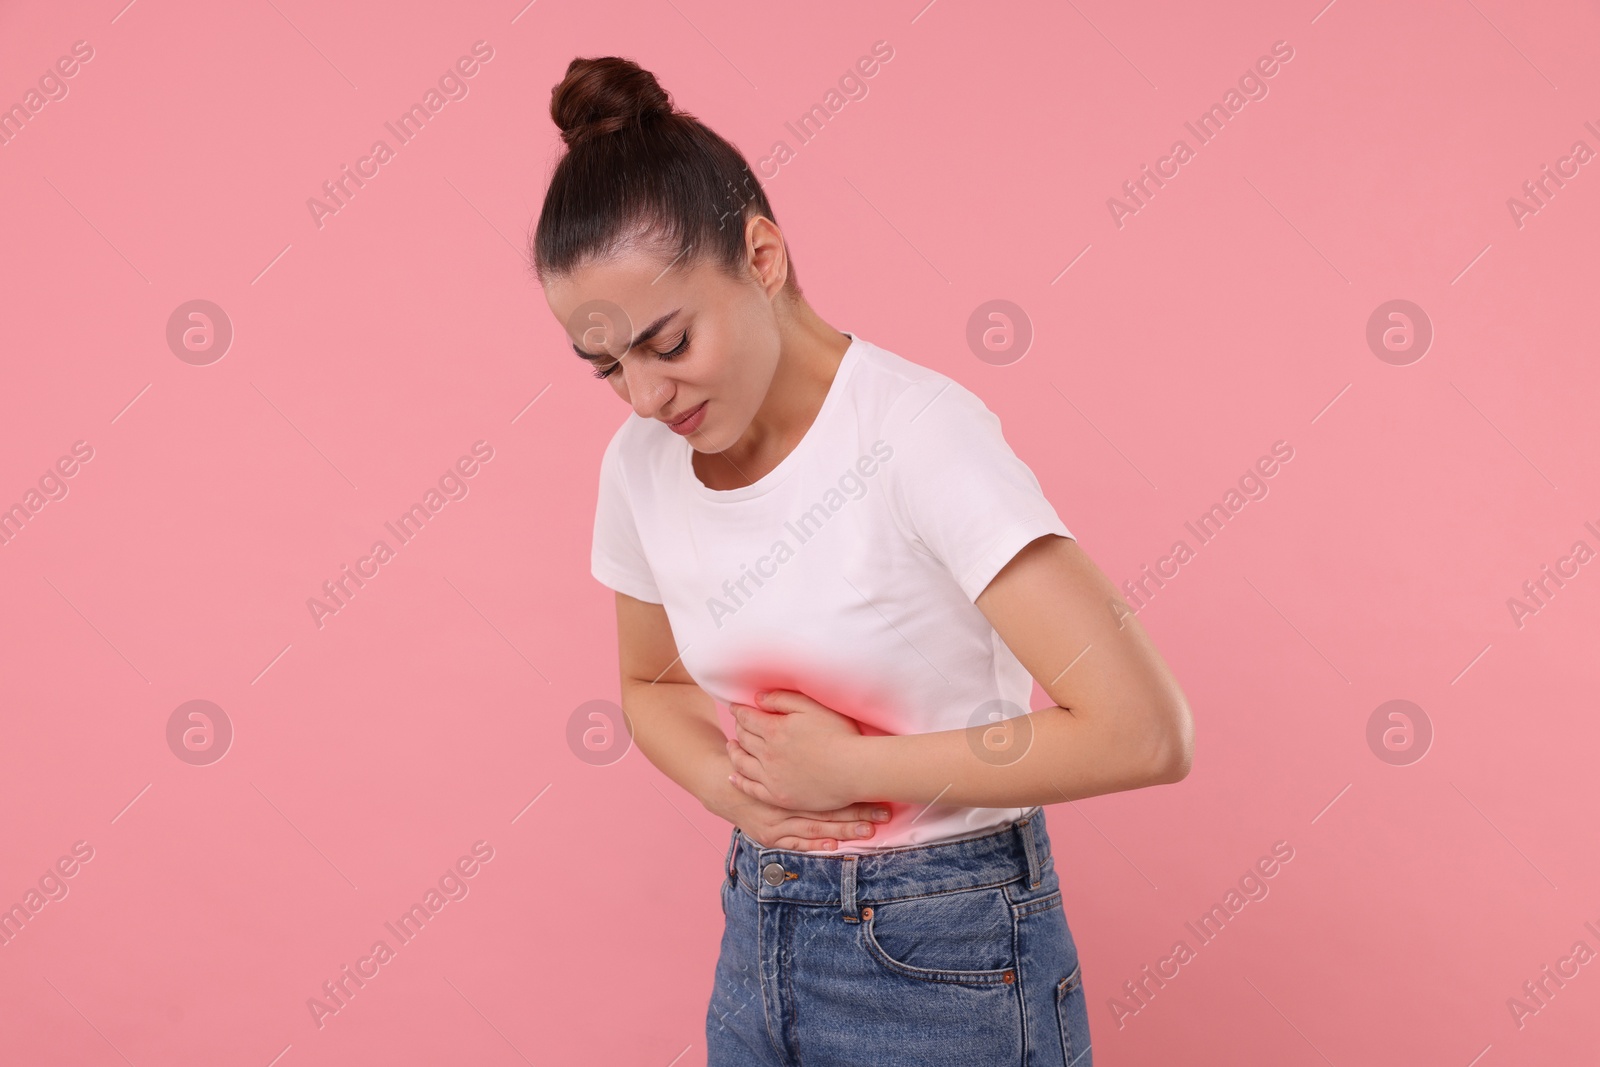 Image of Woman suffering from abdominal pain on pink background